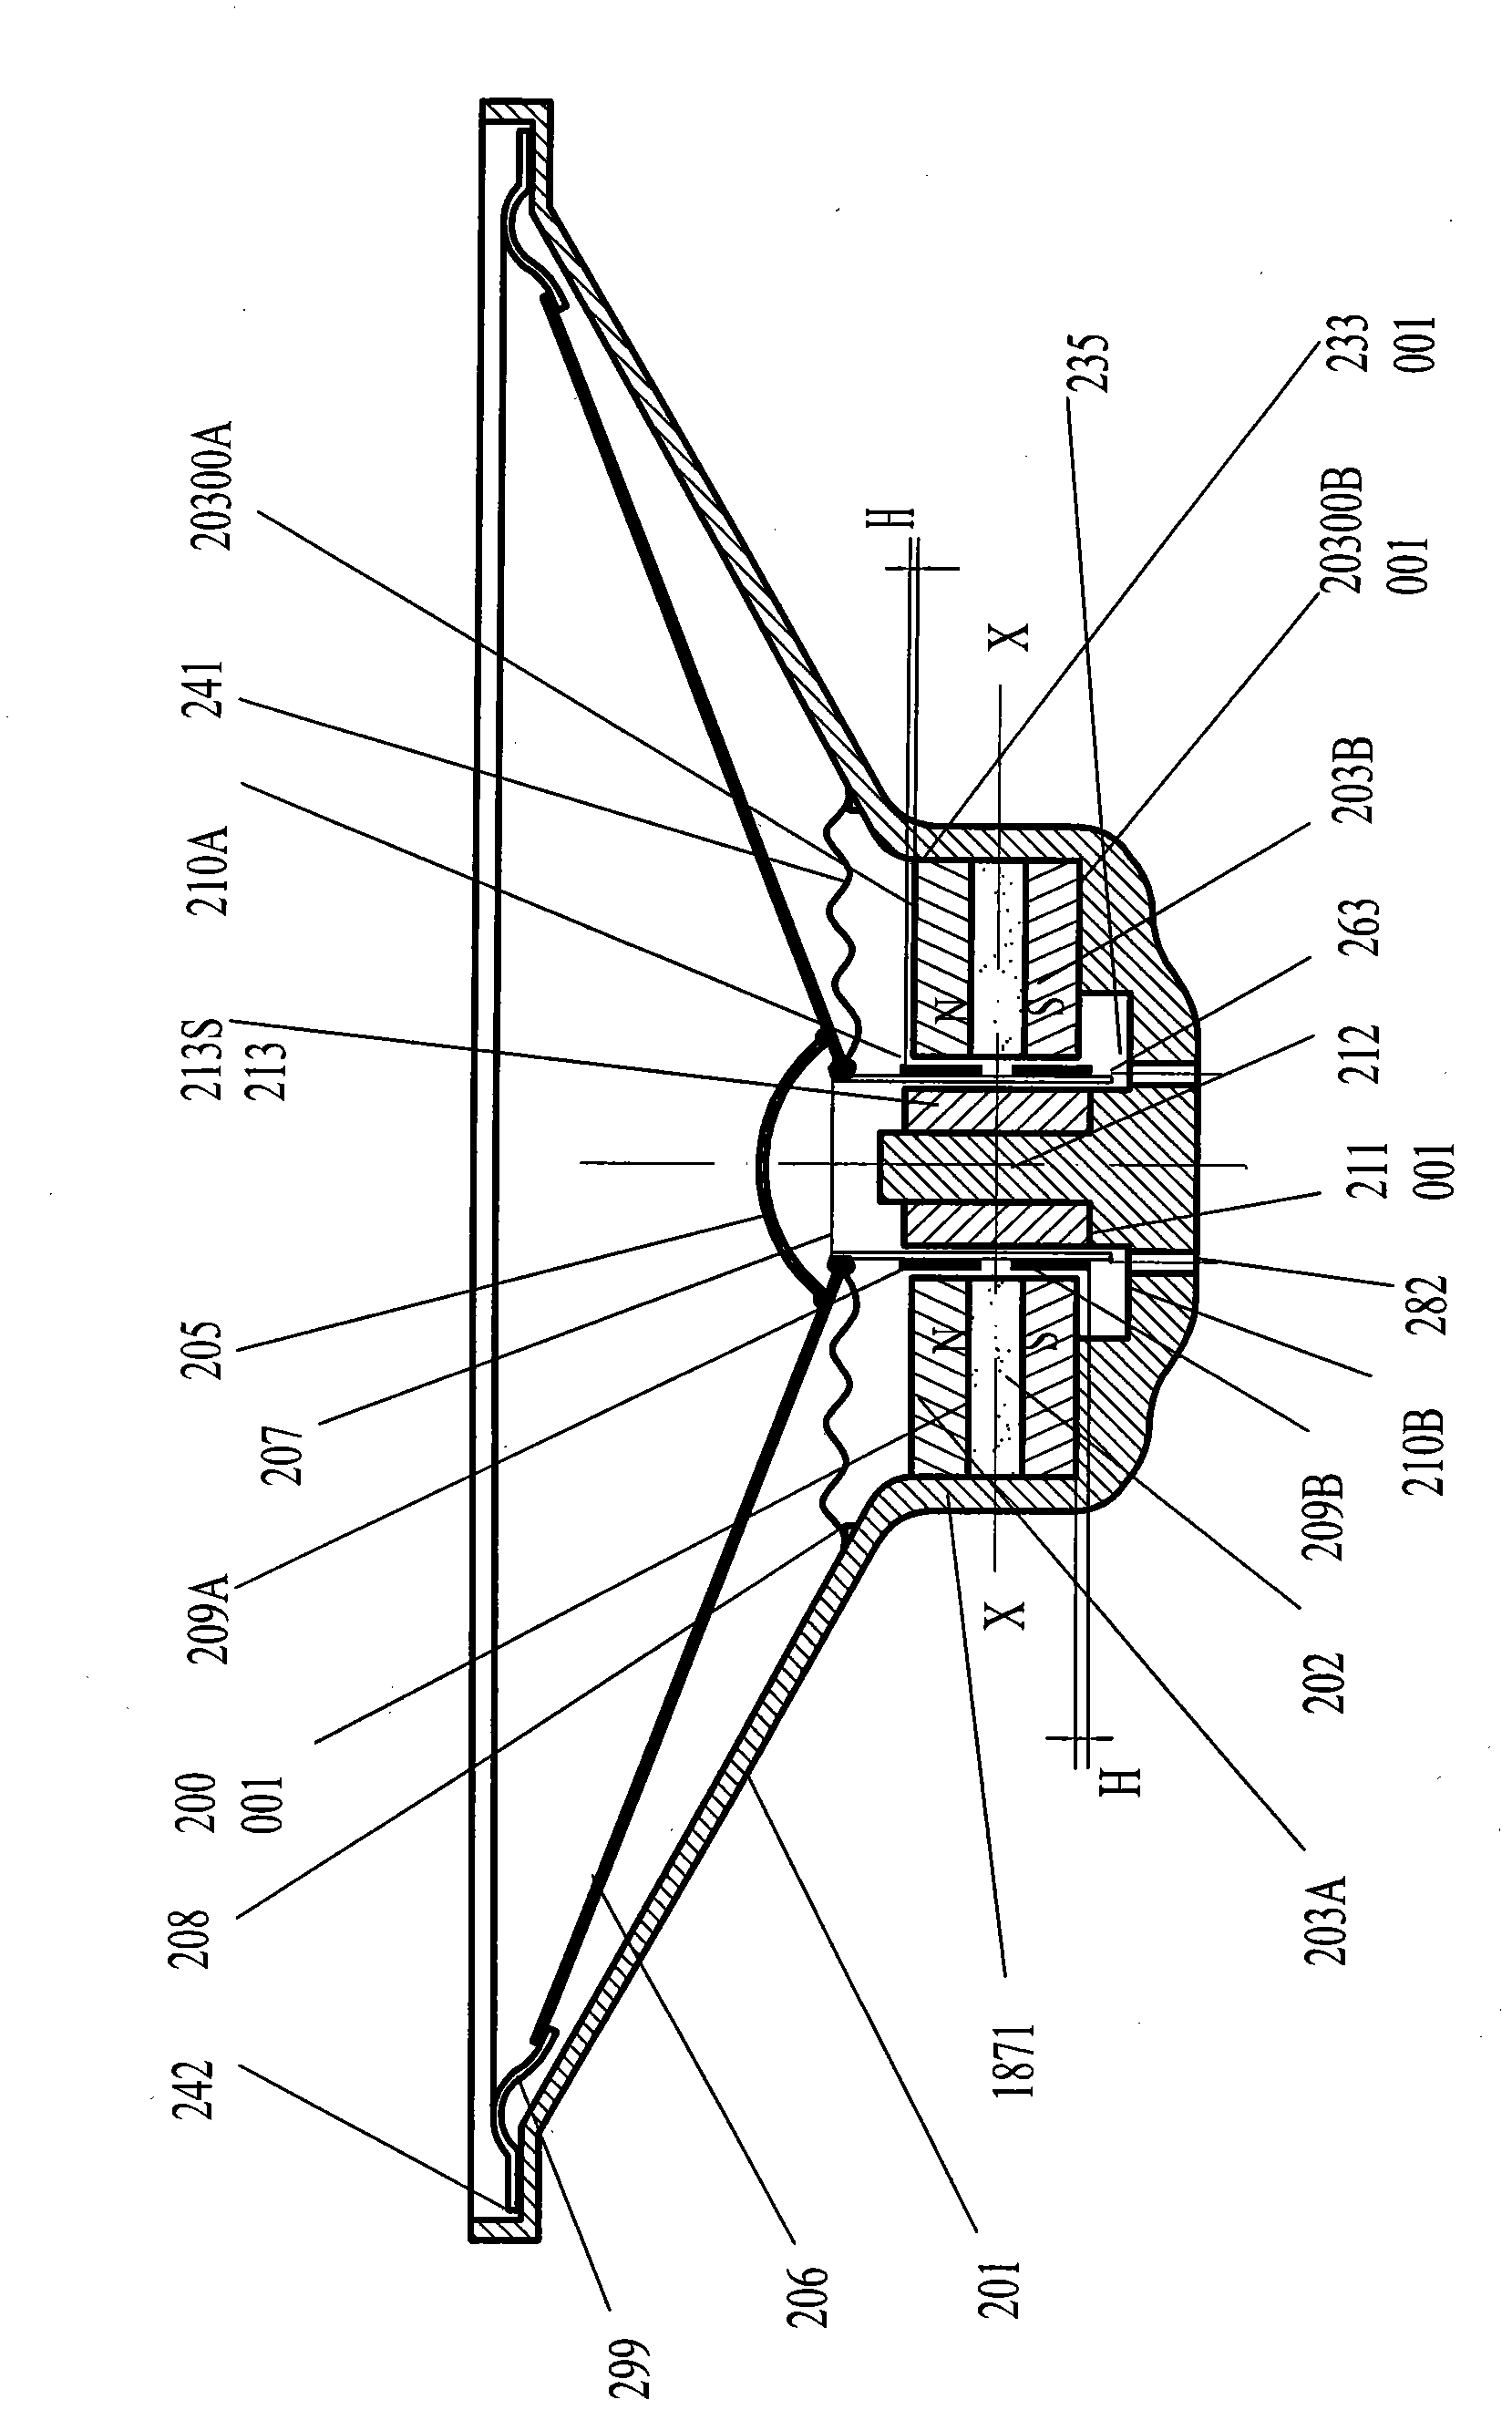 Dual-magnetic-gap dual-coil external-magnetic transducer and preparation method thereof